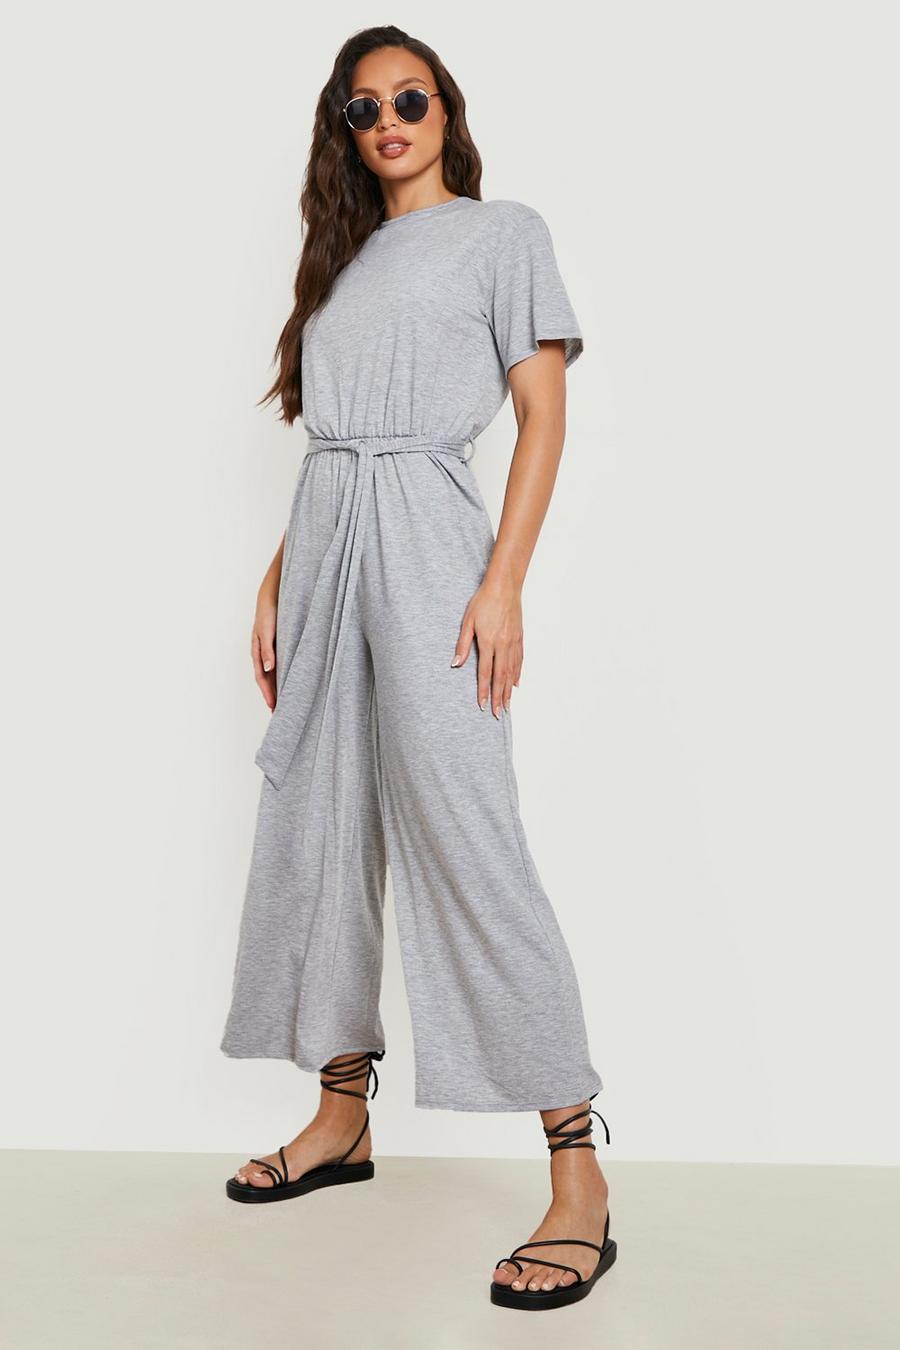 Grey marl Tall Jersey Knit Culottes Jumpsuit image number 1